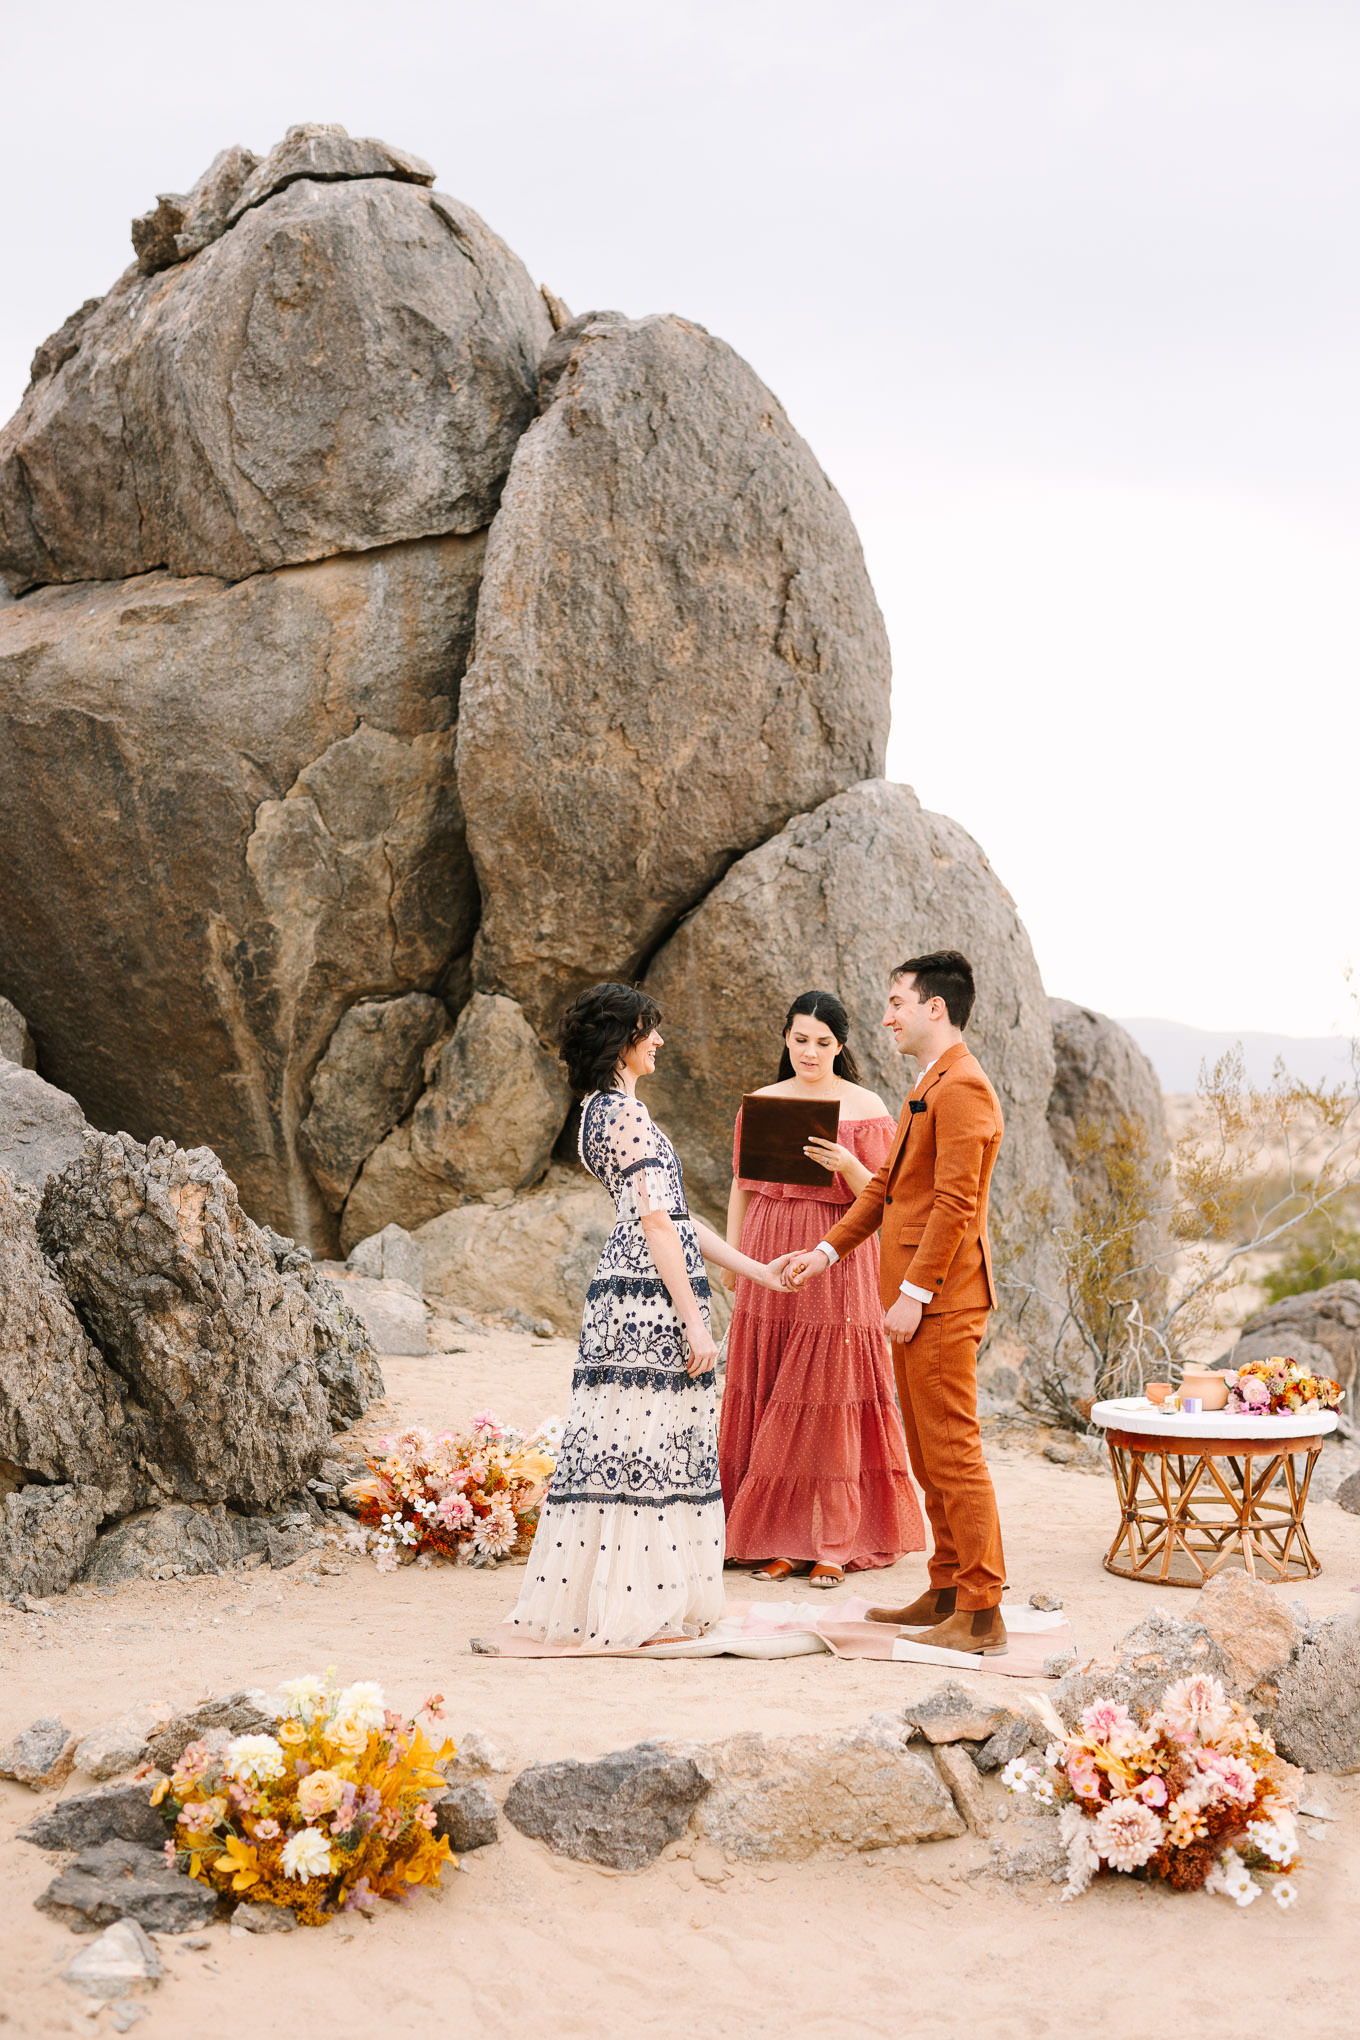 Nowhere Joshua Tree wedding | Wedding and elopement photography roundup | Los Angeles and Palm Springs photographer | #losangeleswedding #palmspringswedding #elopementphotographer Source: Mary Costa Photography | Los Angeles